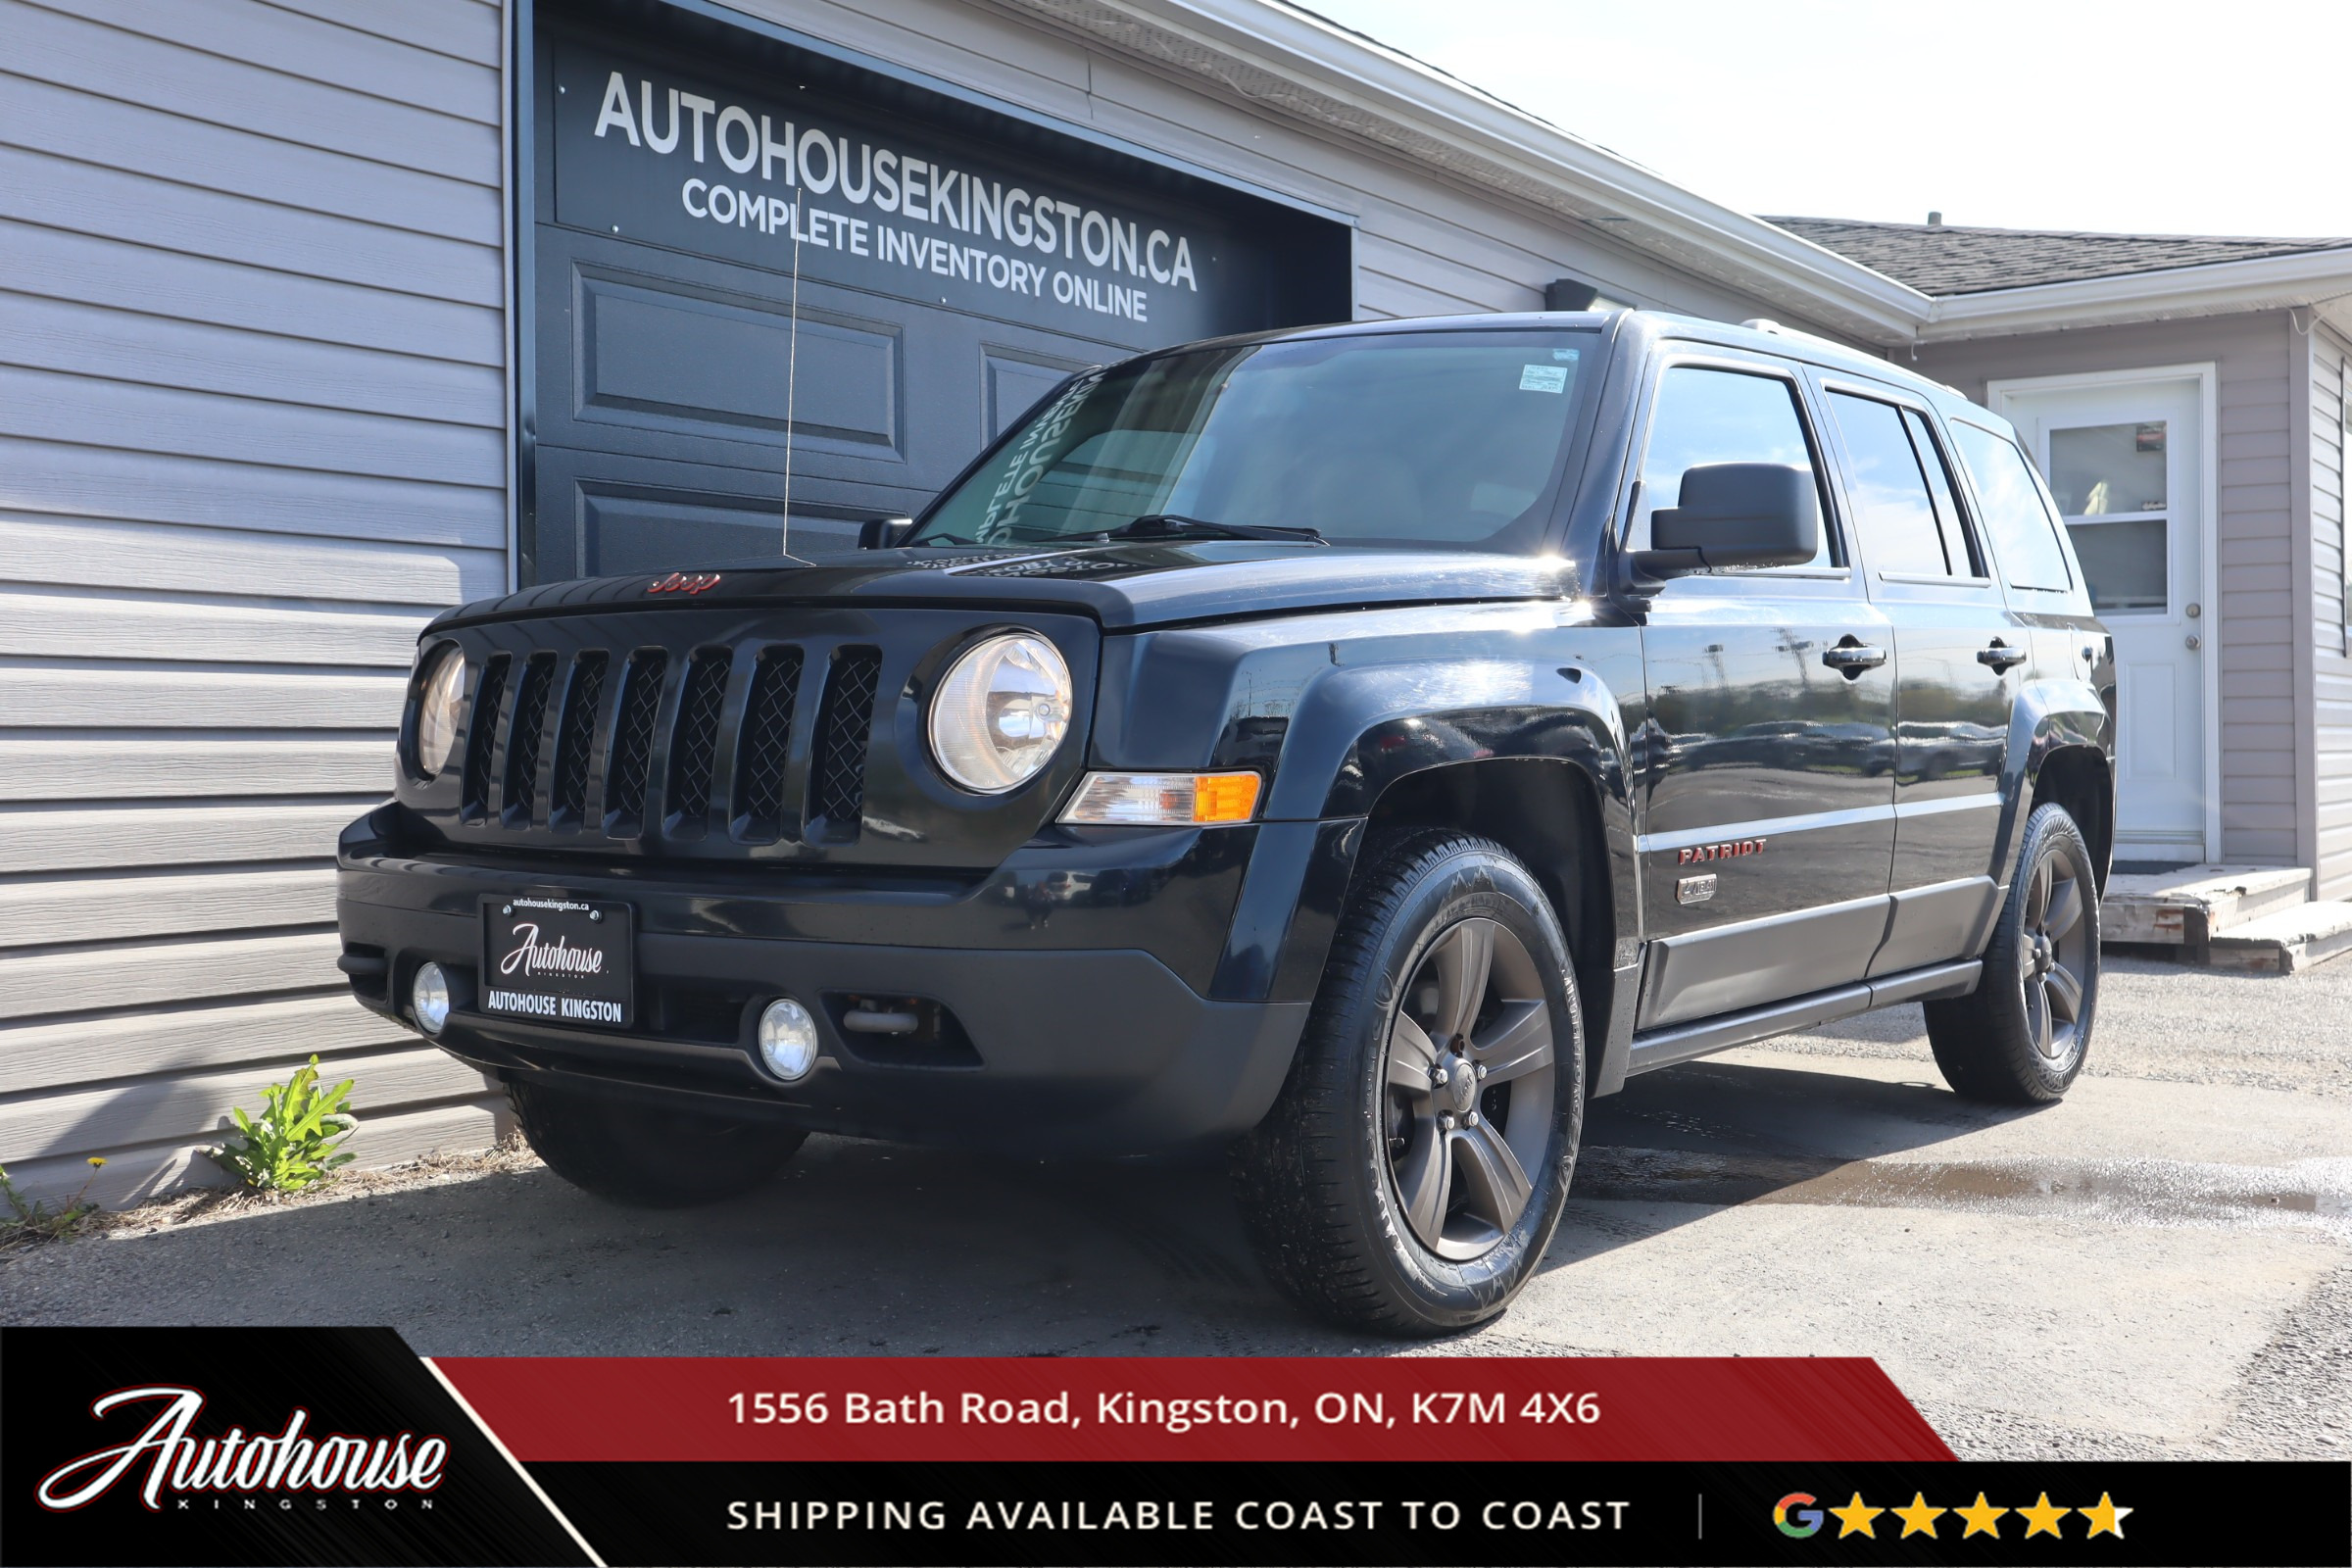 2017 Jeep Patriot Sport/North SUNROOF - LEATHER - 4X4